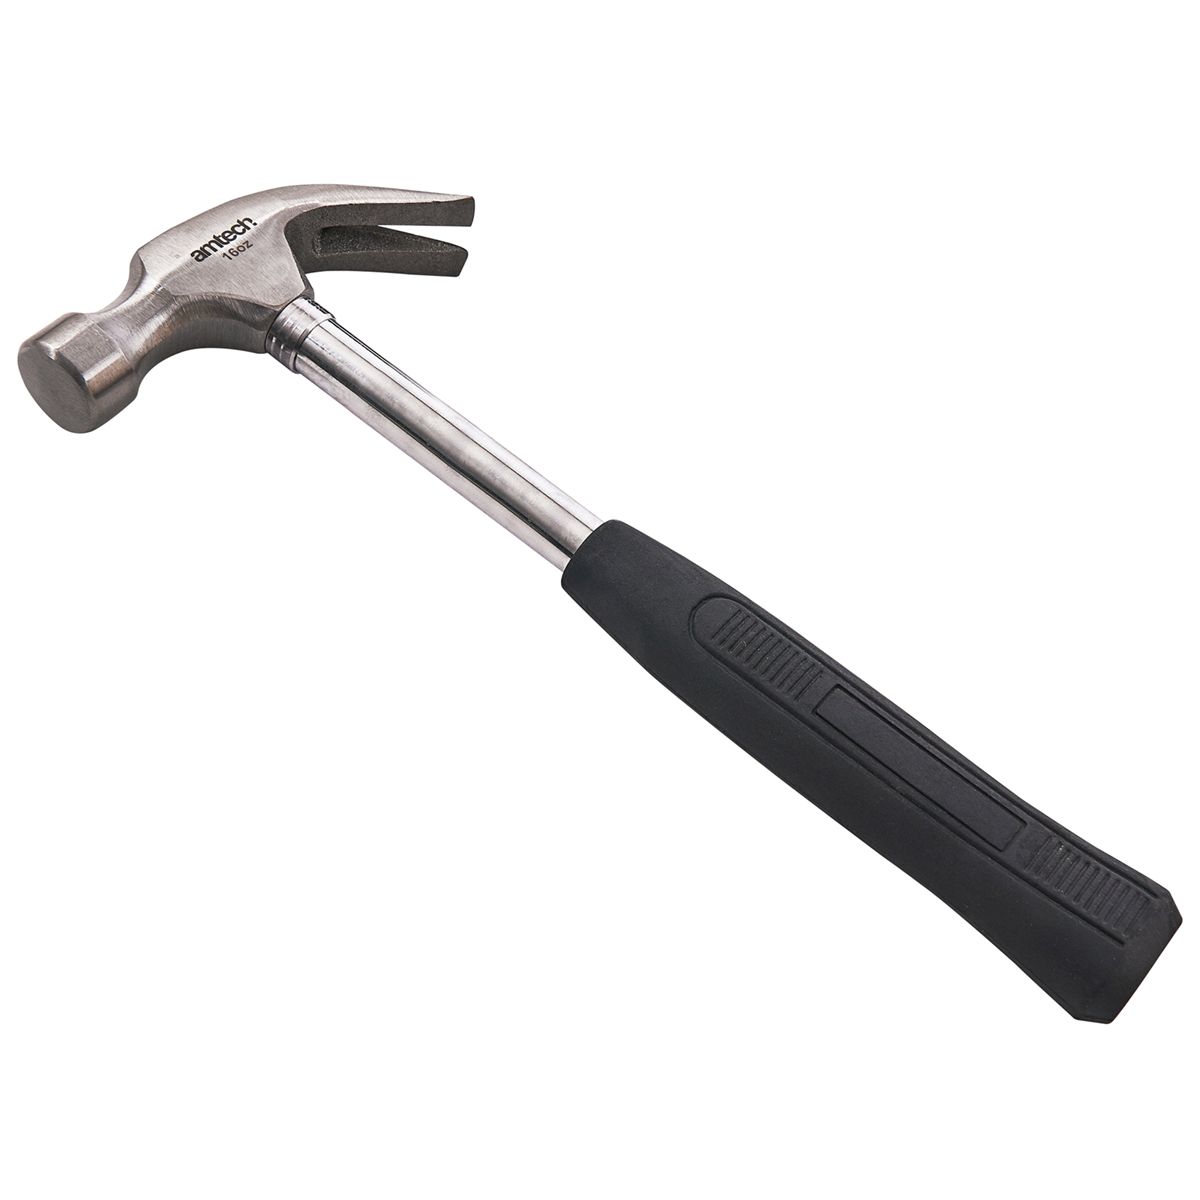 Image of 16oz polished gs claw hammer – steel shaft